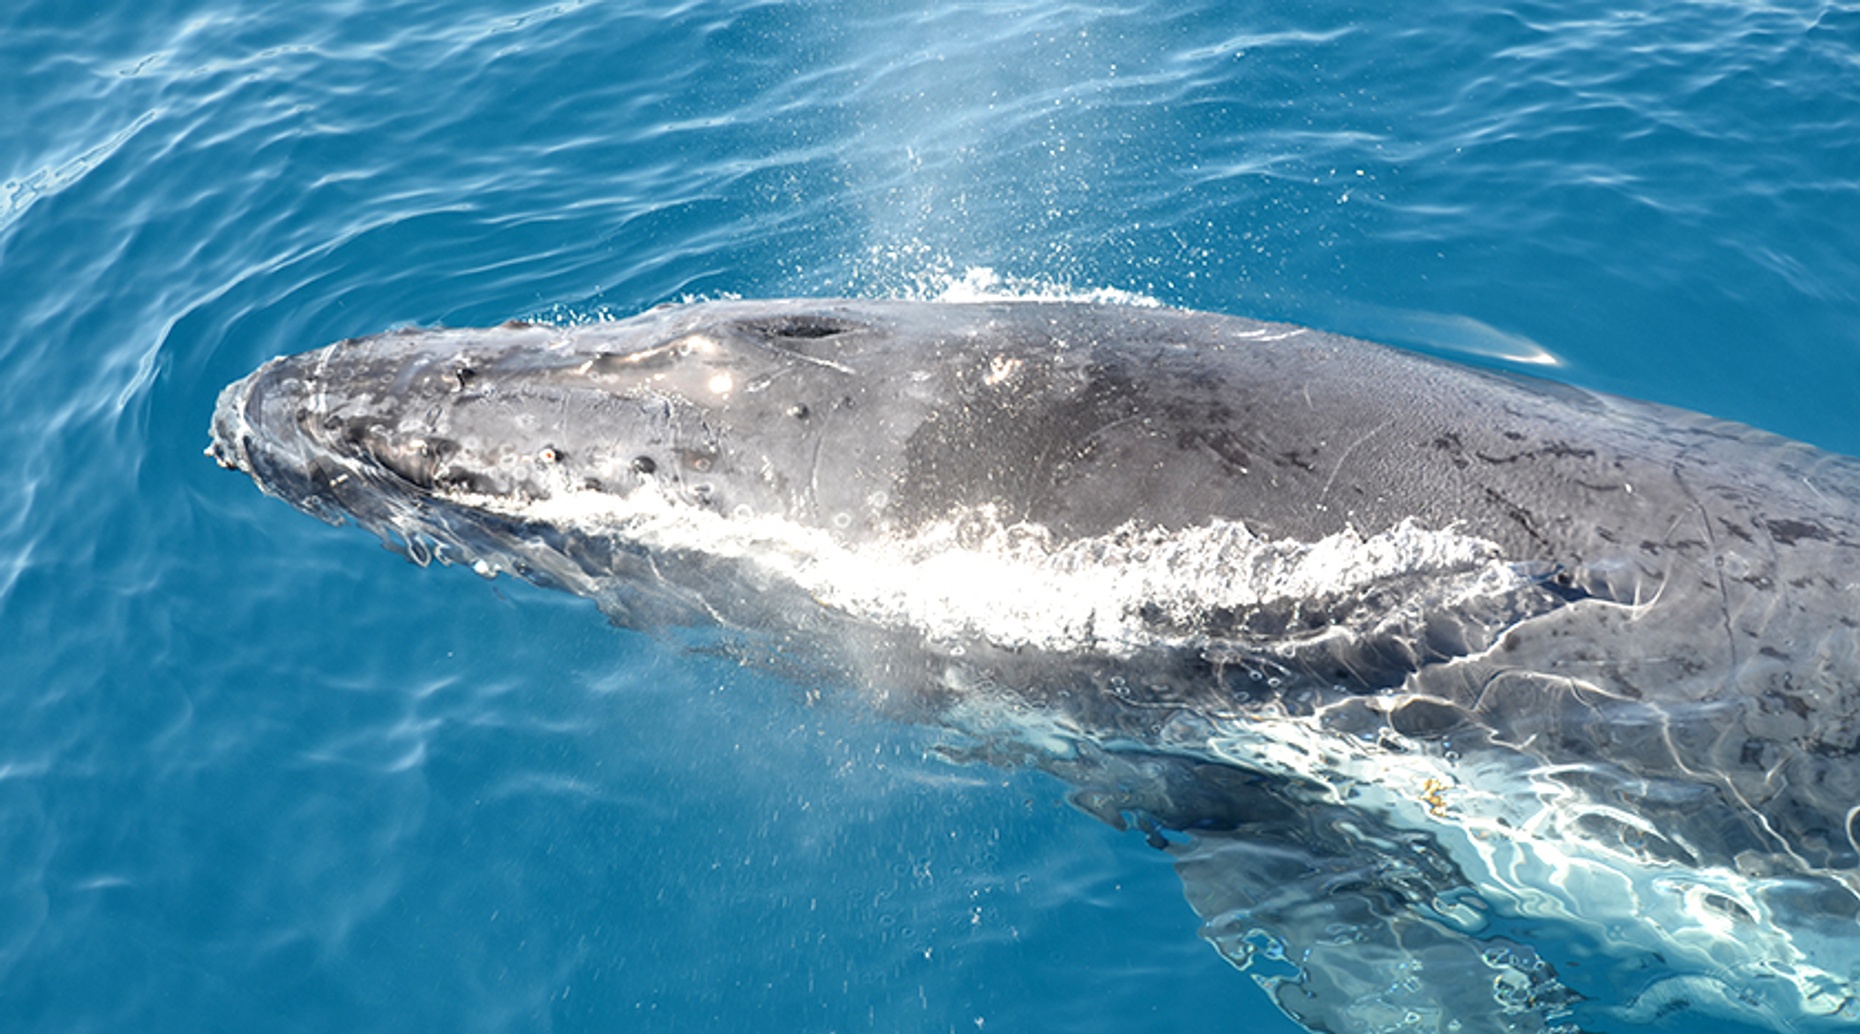 Guided Whale Watching Tour in Puerto Vallarta